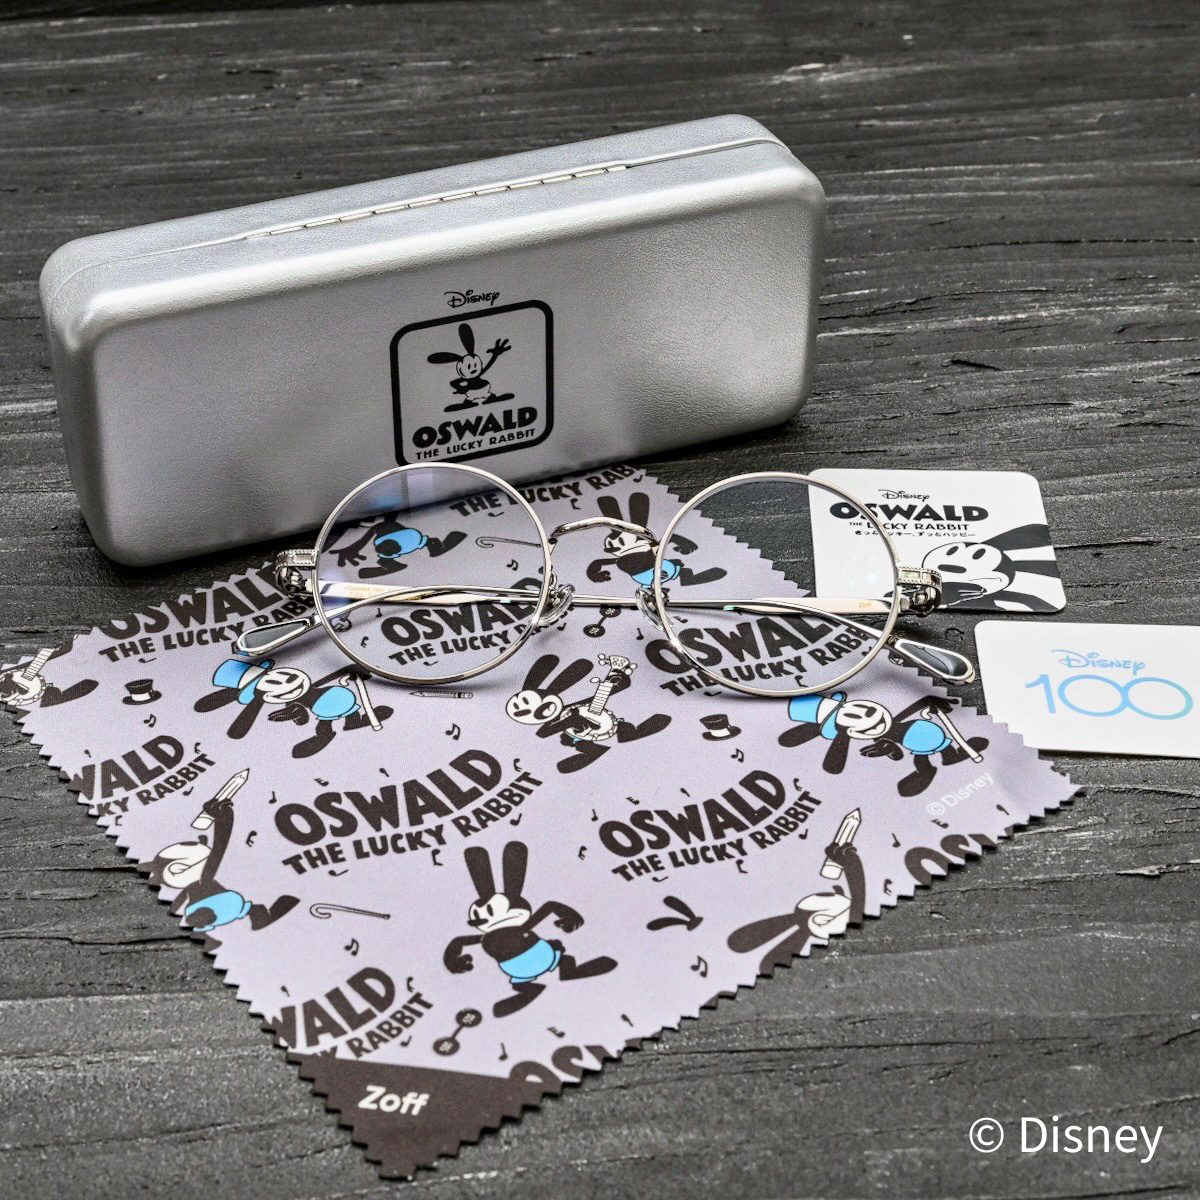 Disney Collection created by Zoff | Disney100 “OSWALD THE LUCKY RABBIT”メガネ